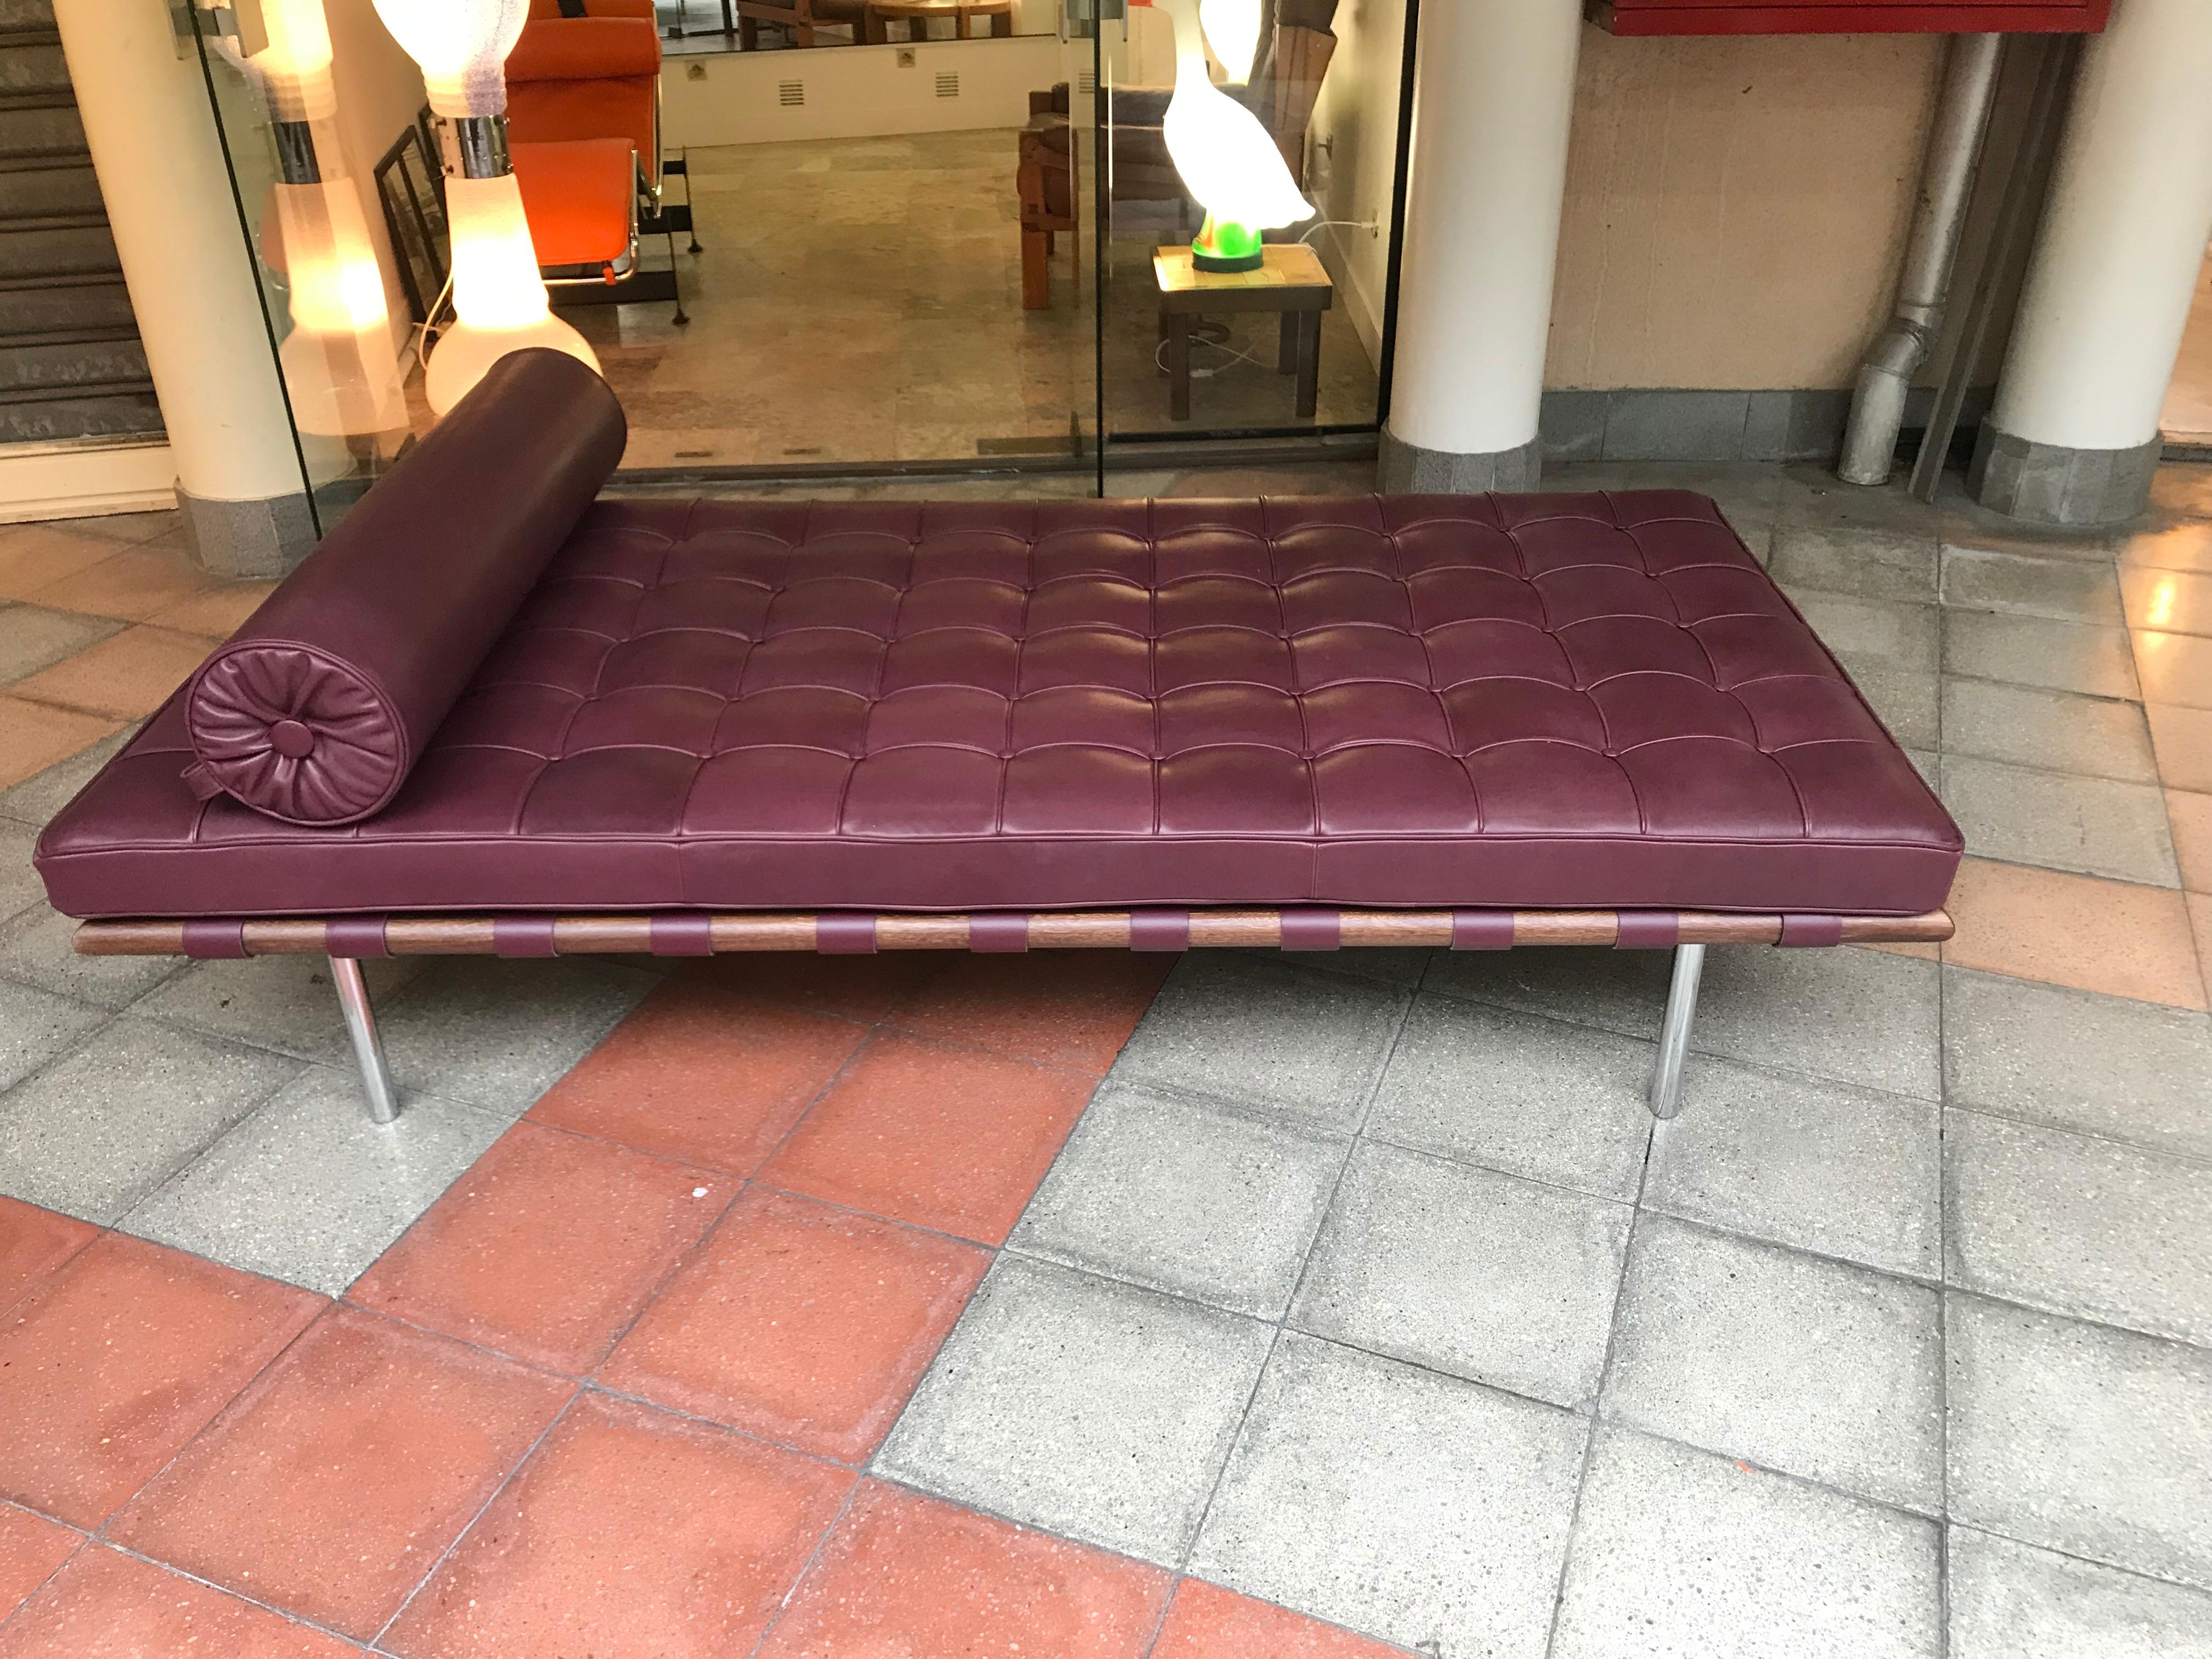 Superb daybed
Mies van der Rohe
Knoll edition

Special order in burgundy/purple lambskin,

circa 2012.

In a perfect condition
Very rare.